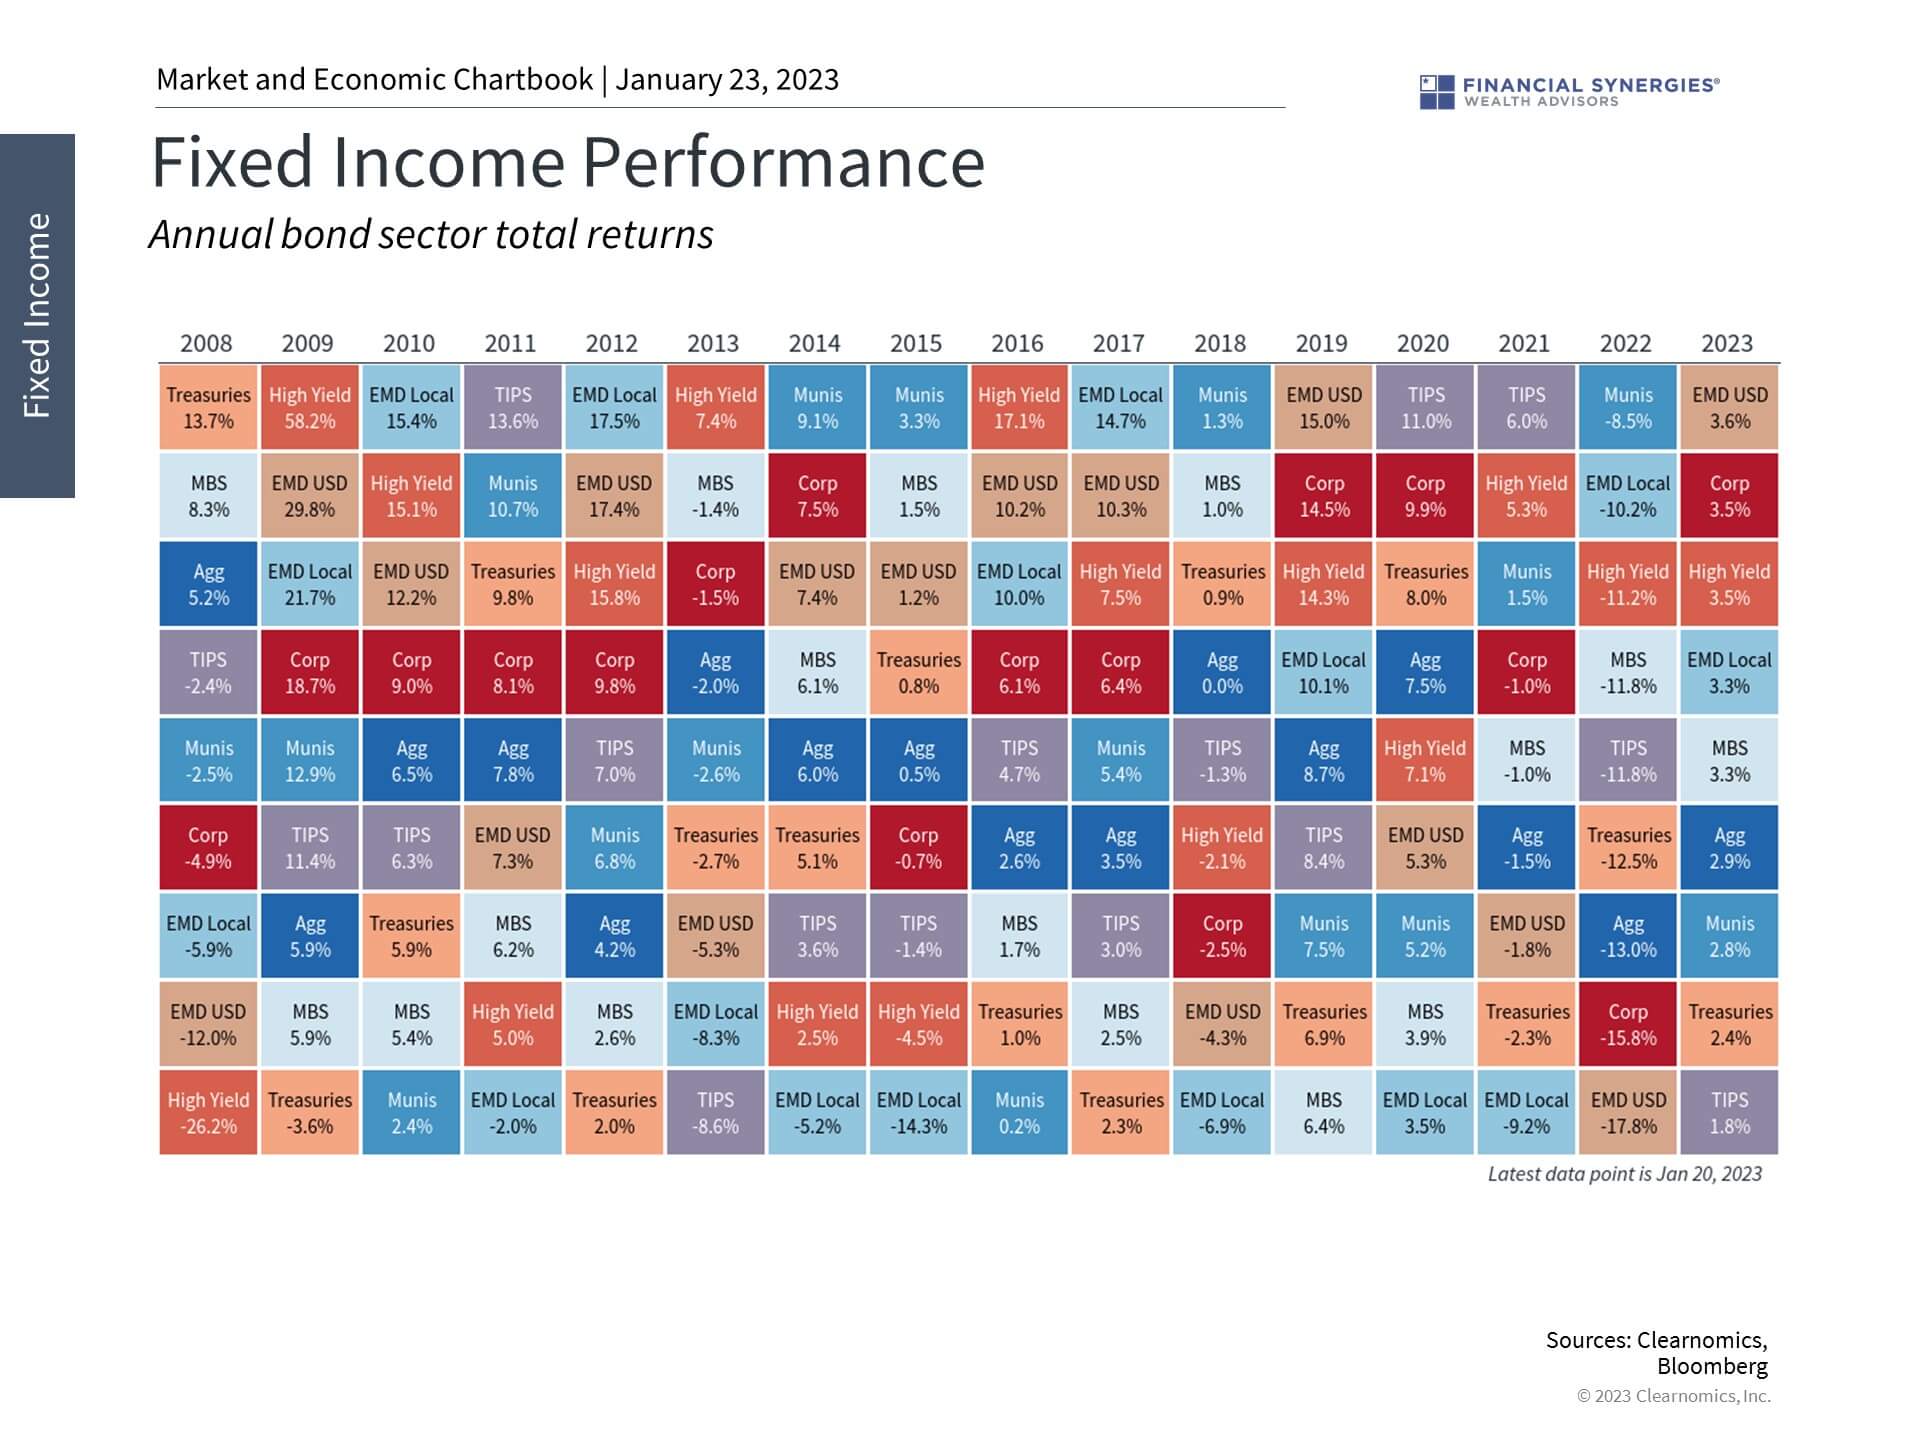 Fixed Income Performance